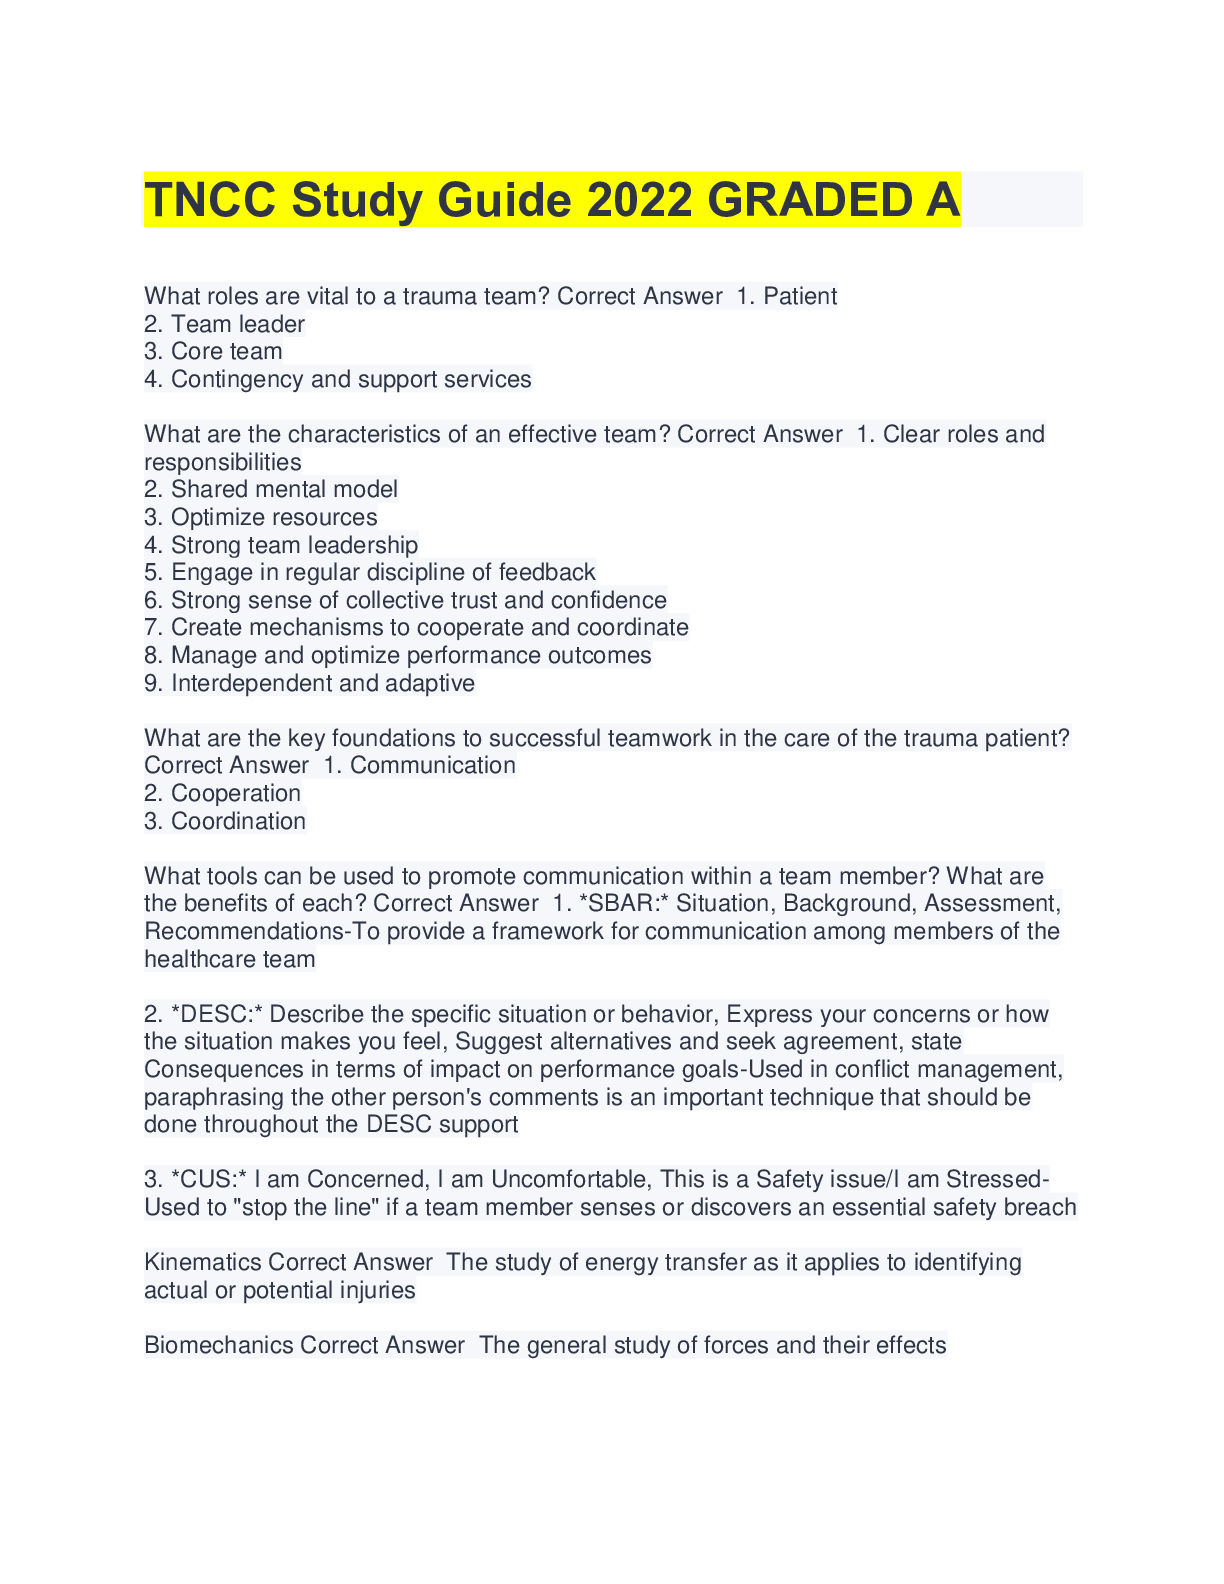 TNCC FULL SOLUTION PACK(ALL TNCC EXAMS AND STUDY QUESTIONS ARE HERE